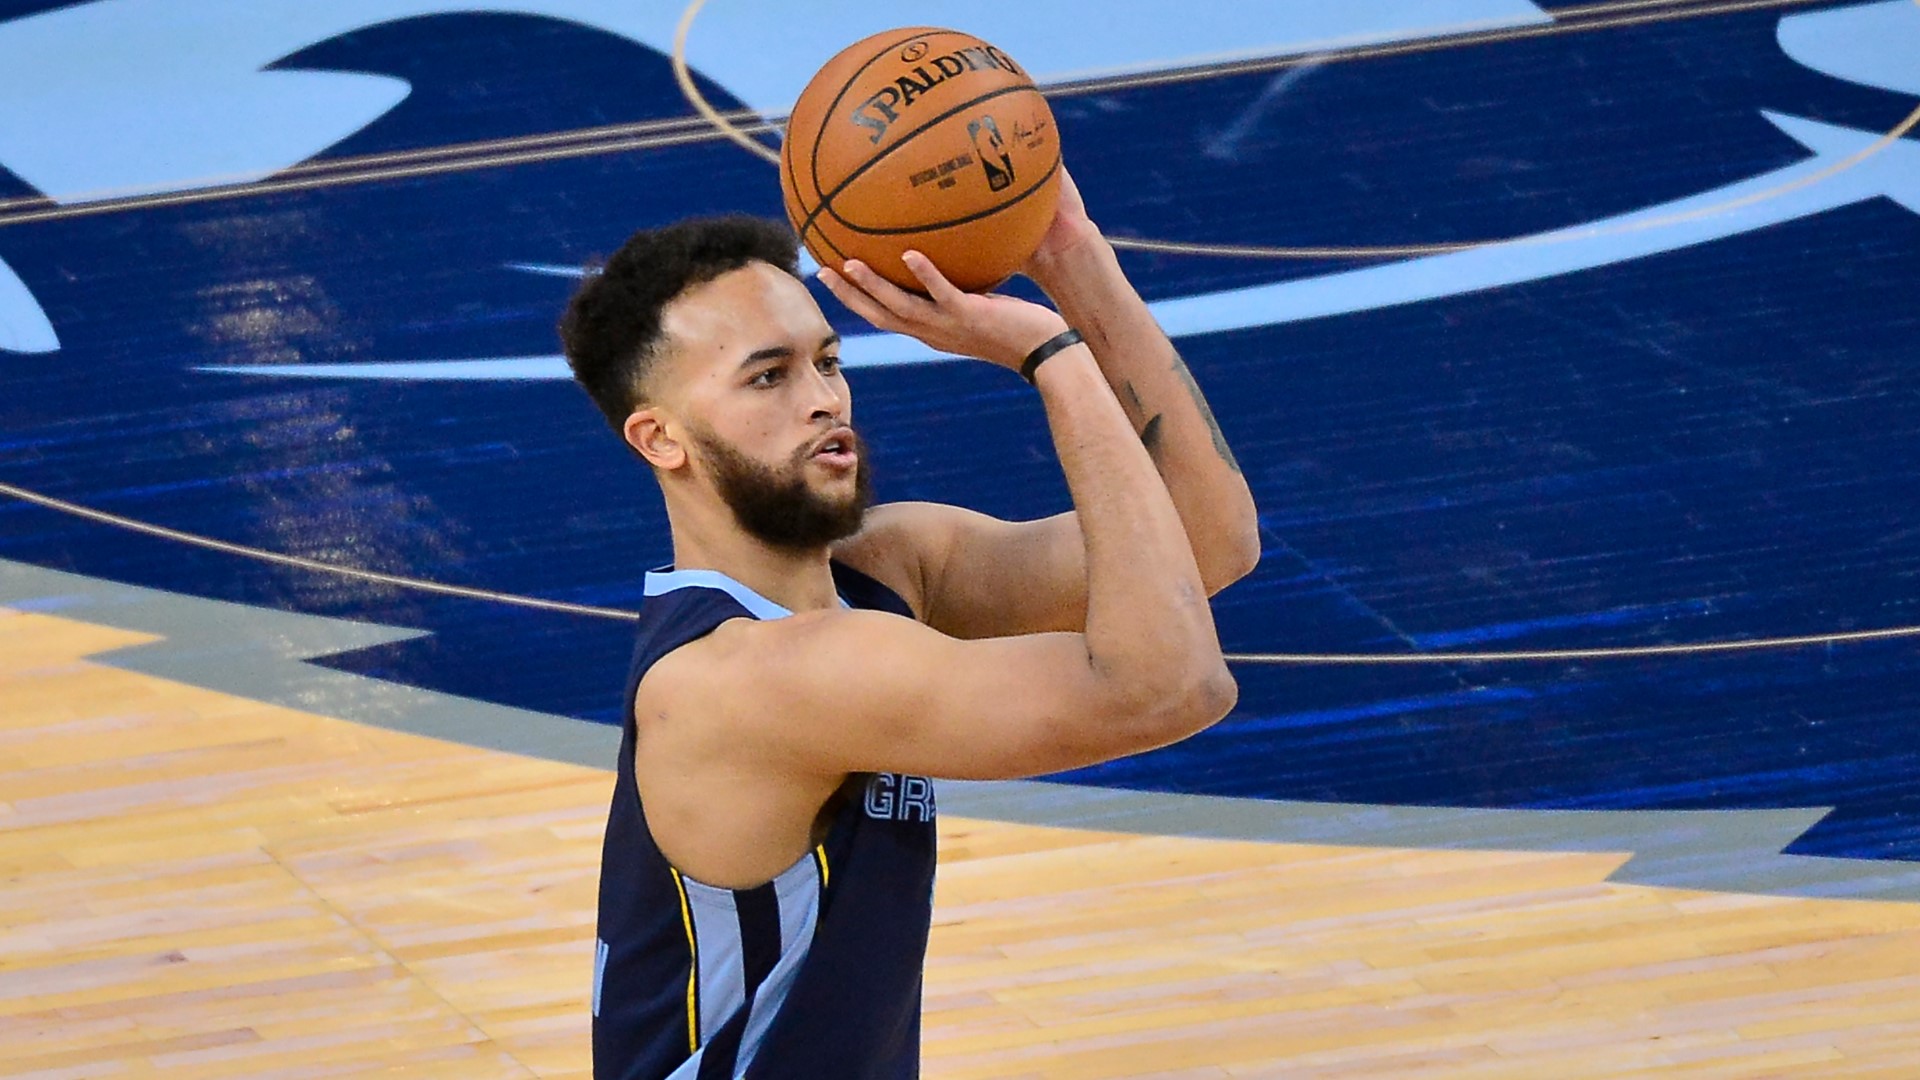 Kyle Anderson hit a career-high six 3 of Memphis’ franchise-record 23 3-pointers and scored 27 points to help the Grizzlies snap a four-game losing streak.